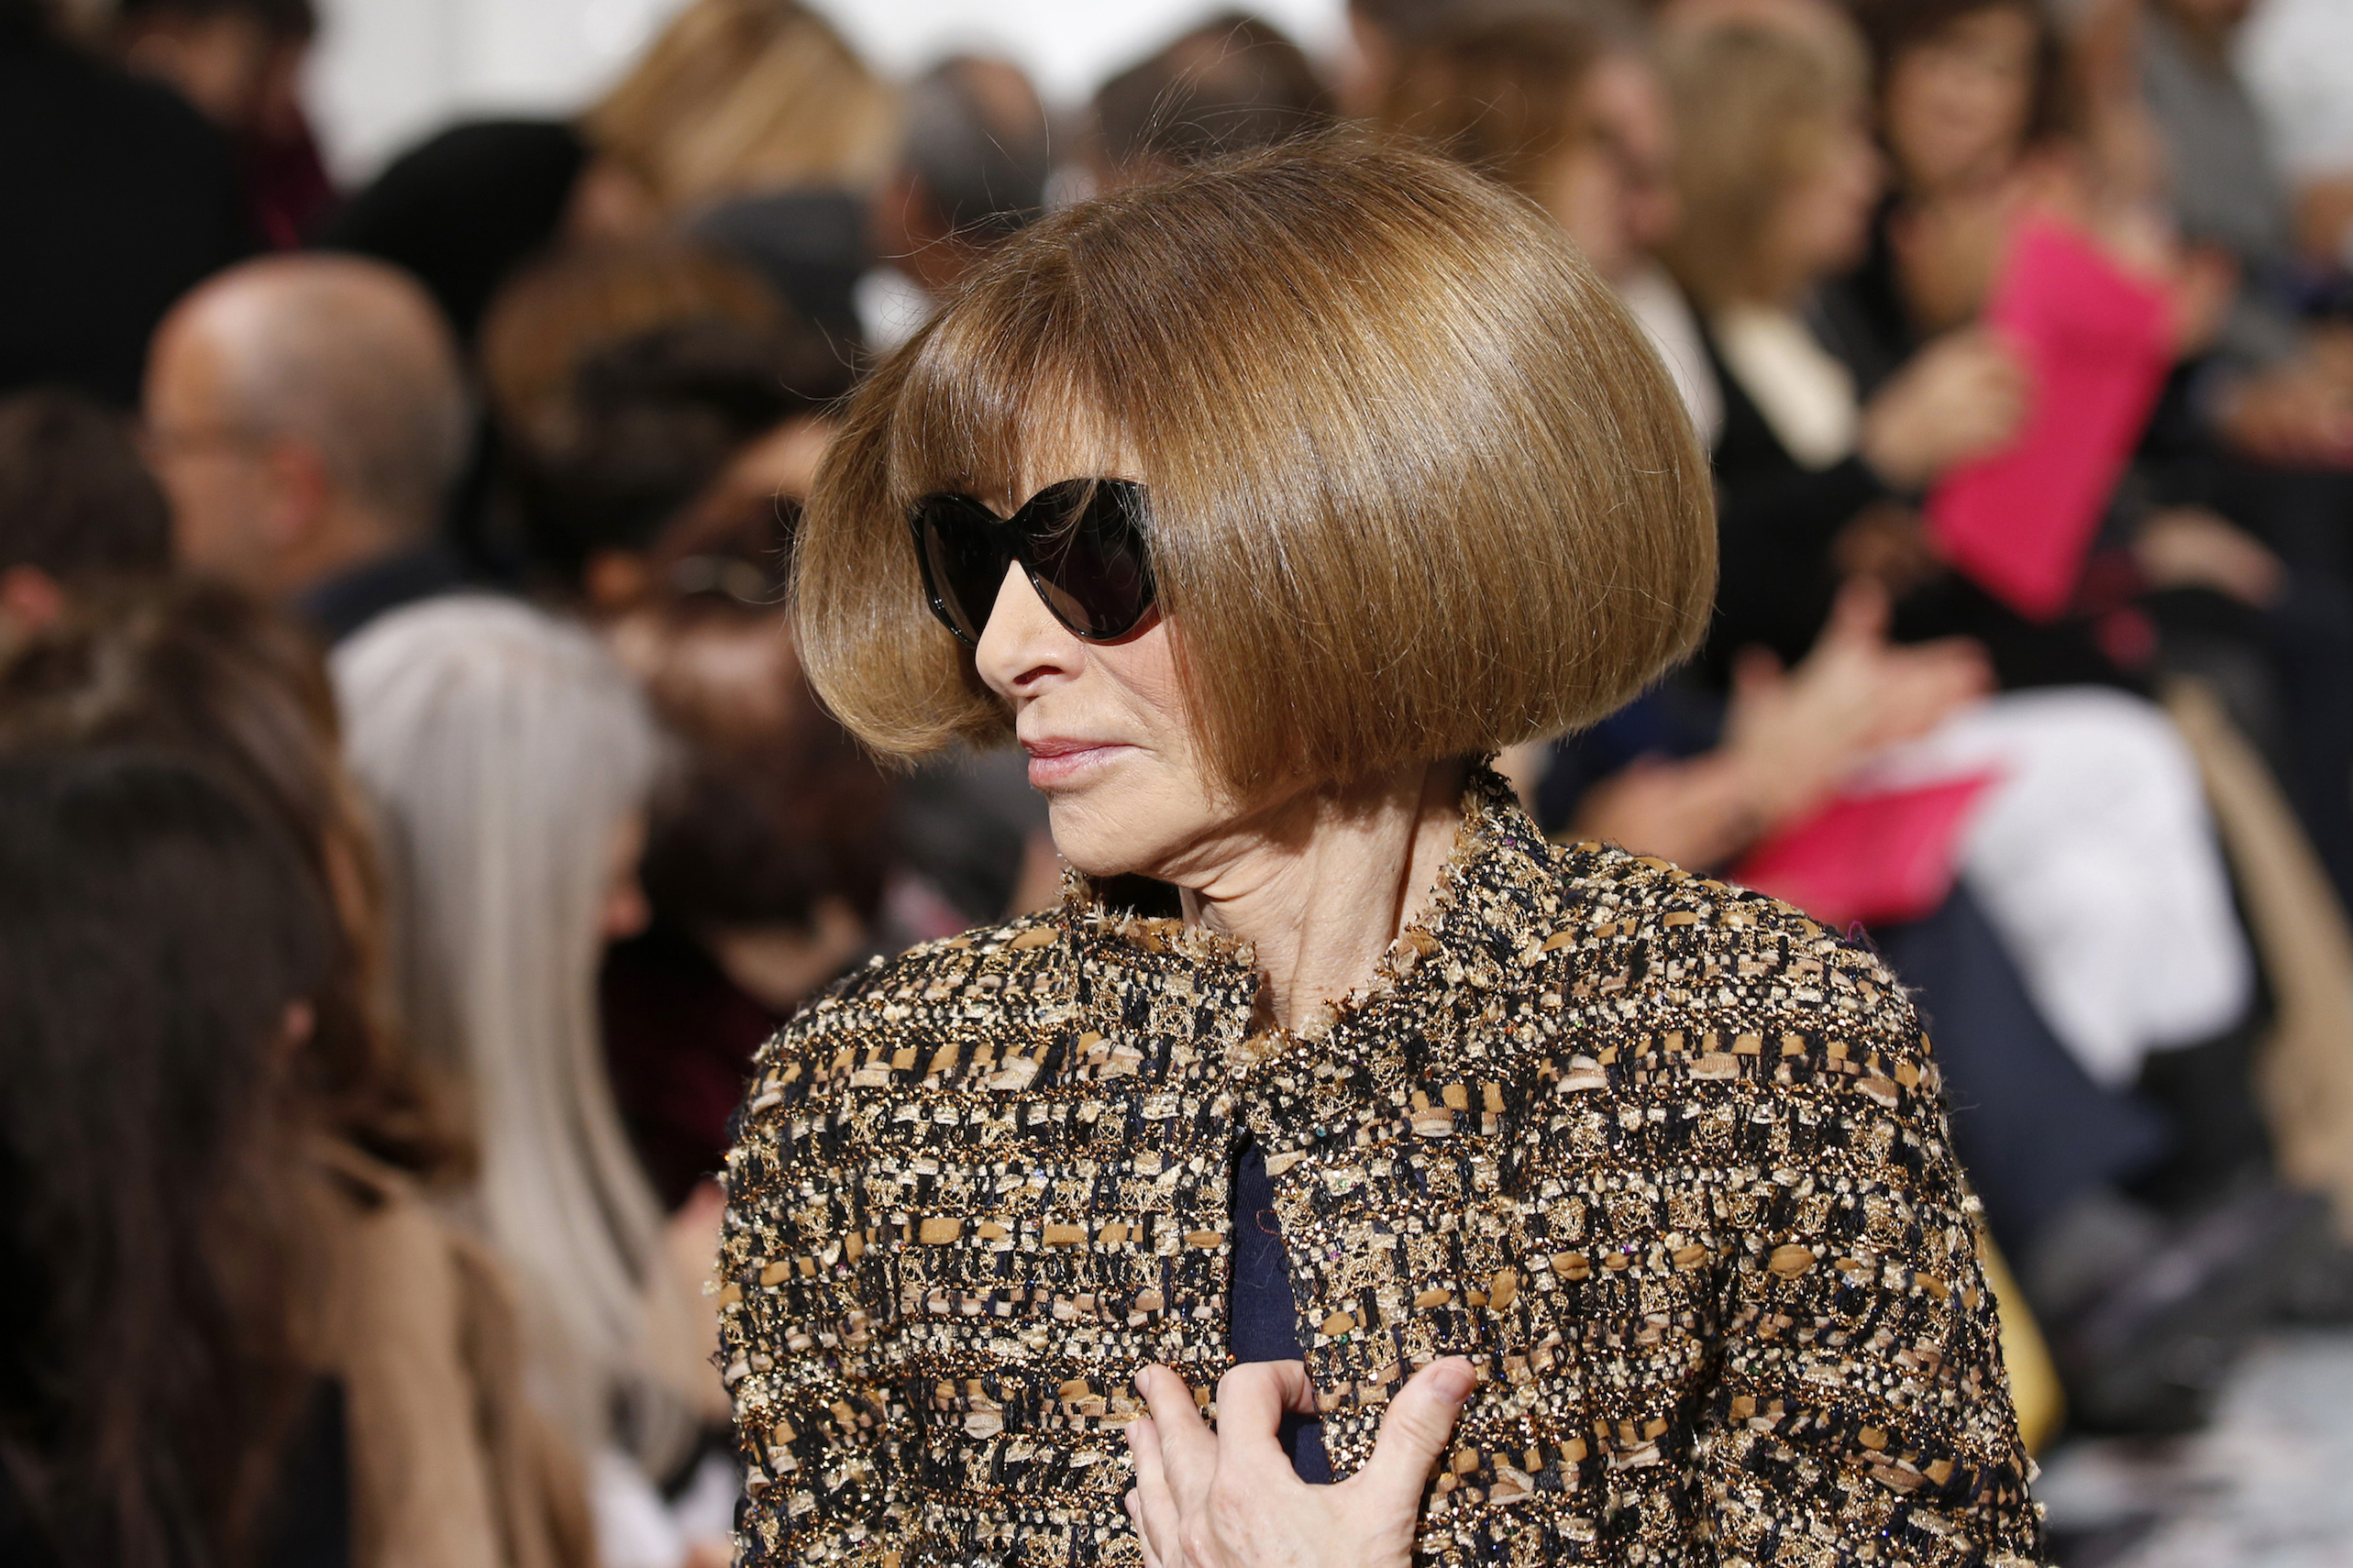 Anna Wintour, the editor-in-chief of American Vogue was also invited to the lavish Trump wedding. (Photo: Reuters)